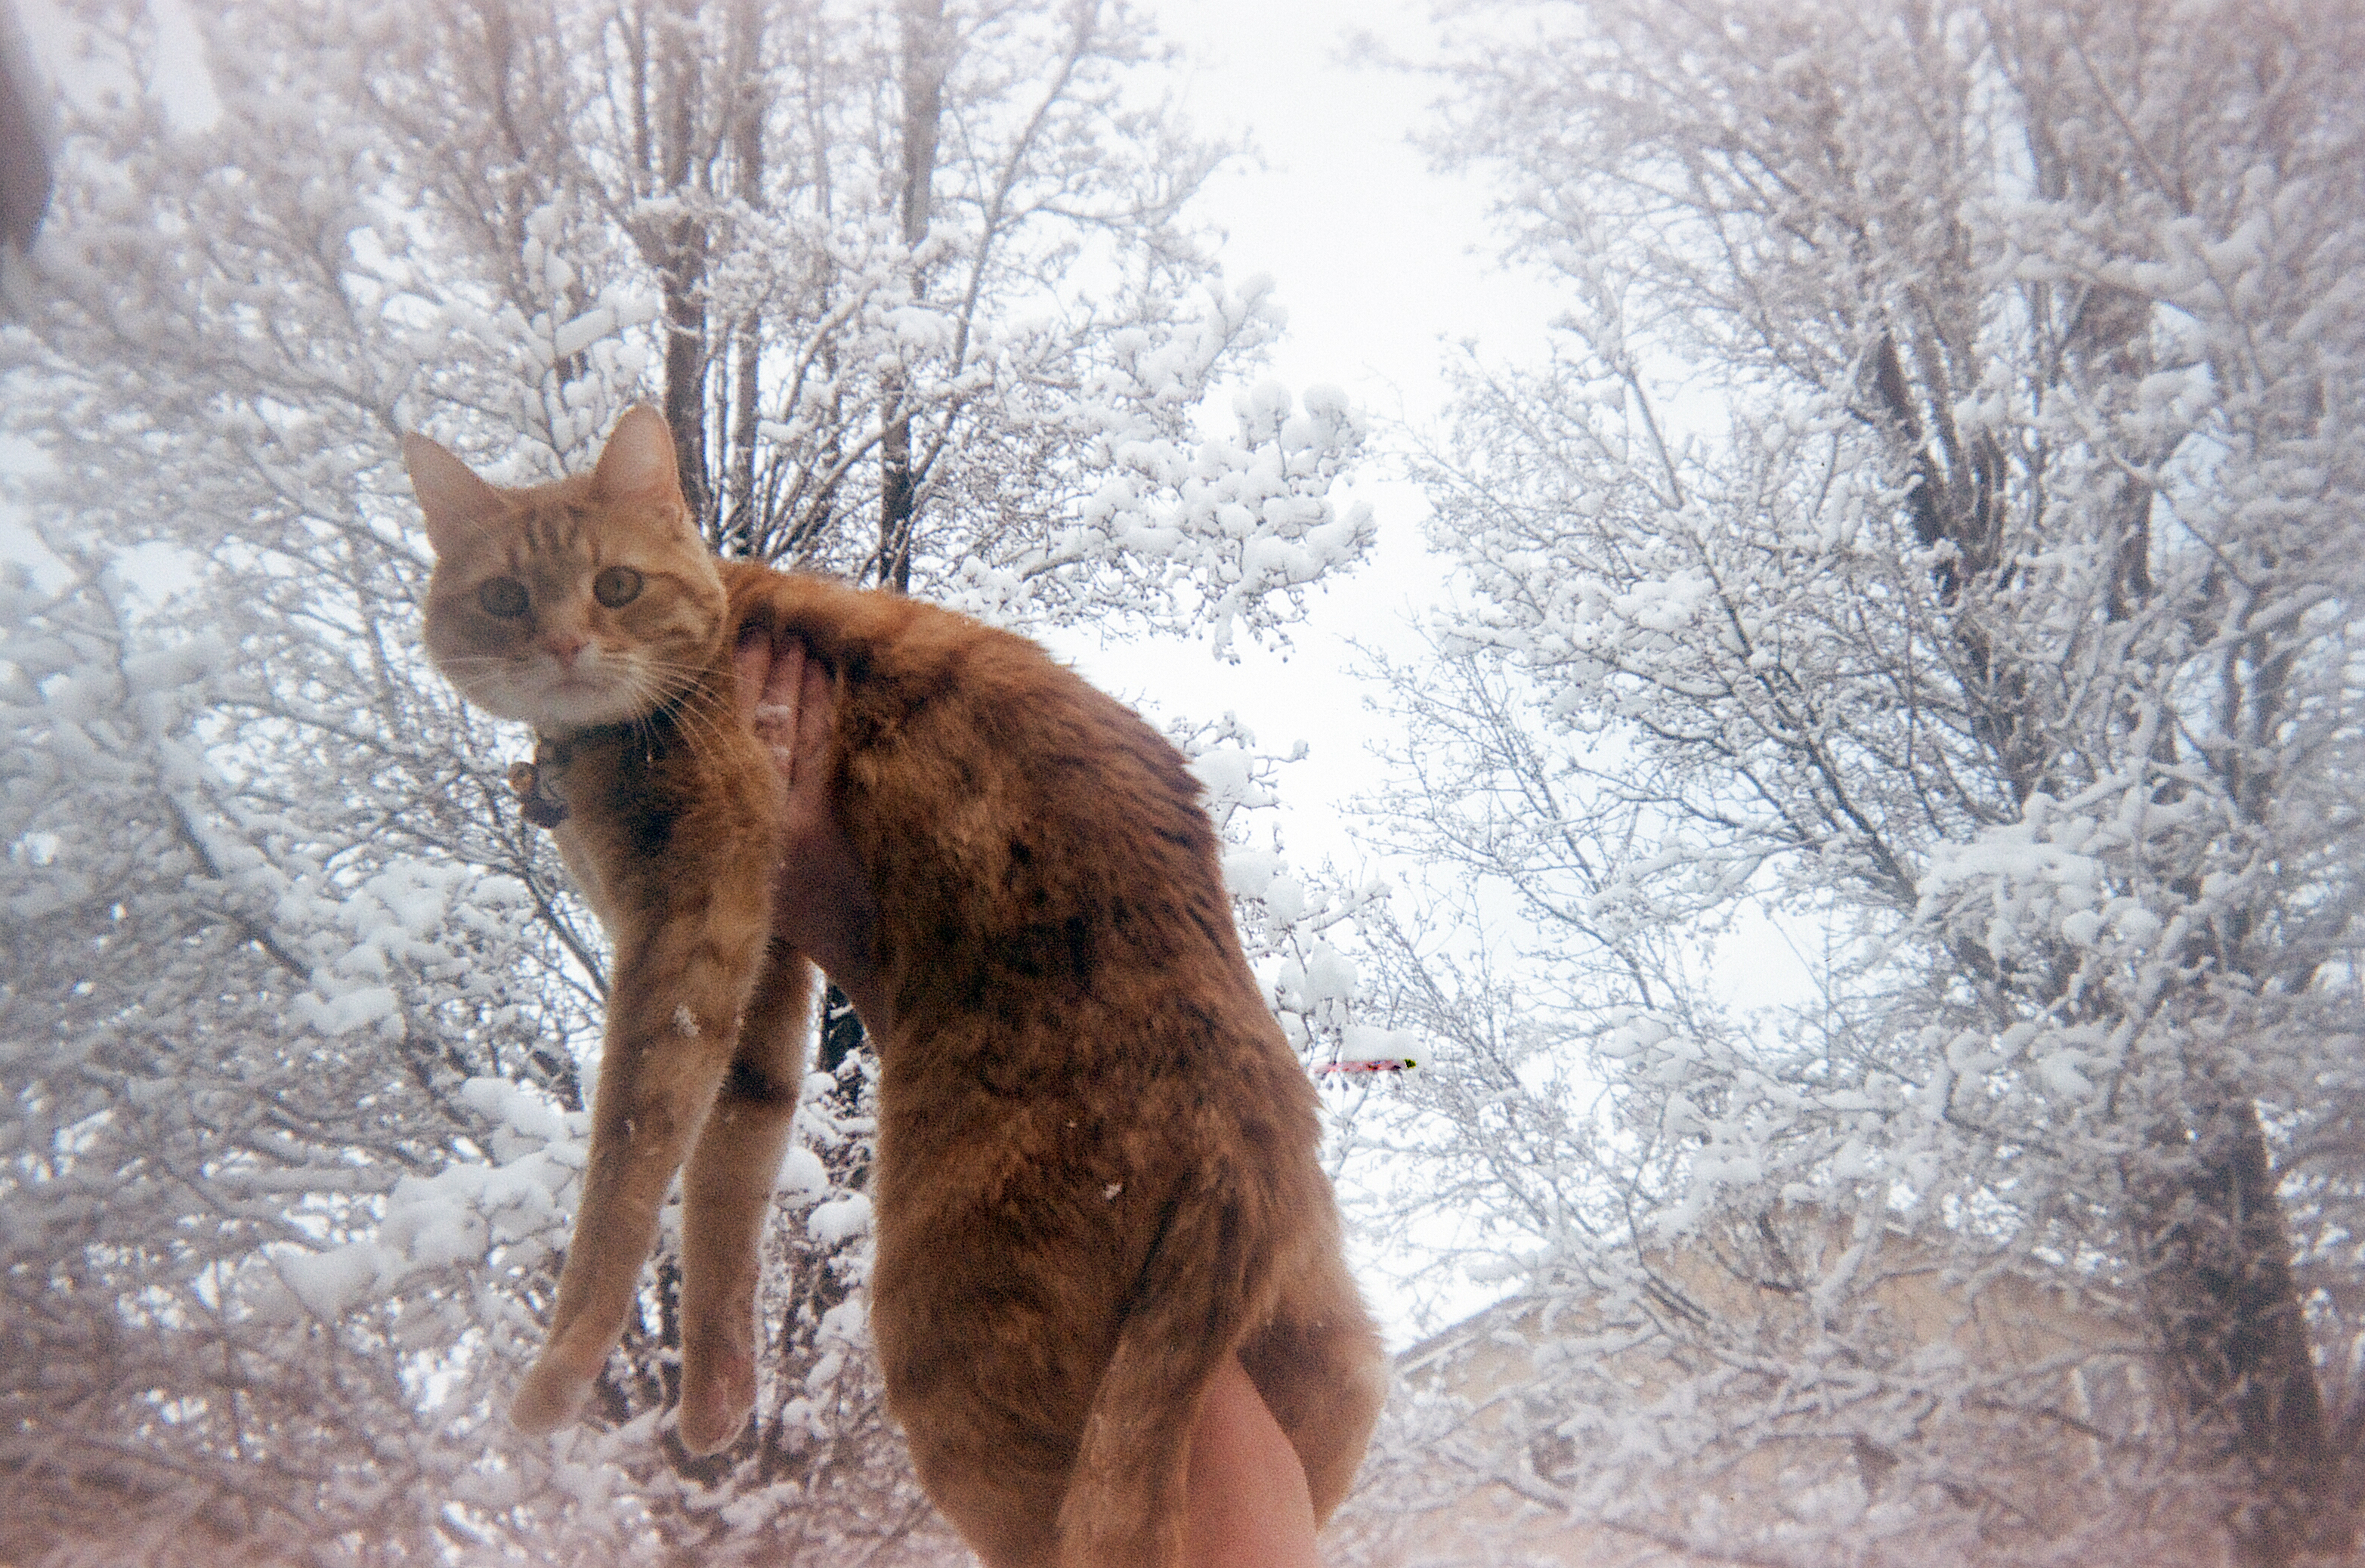 A skinny orange tabby cat being held up in front of a background of snowy trees.